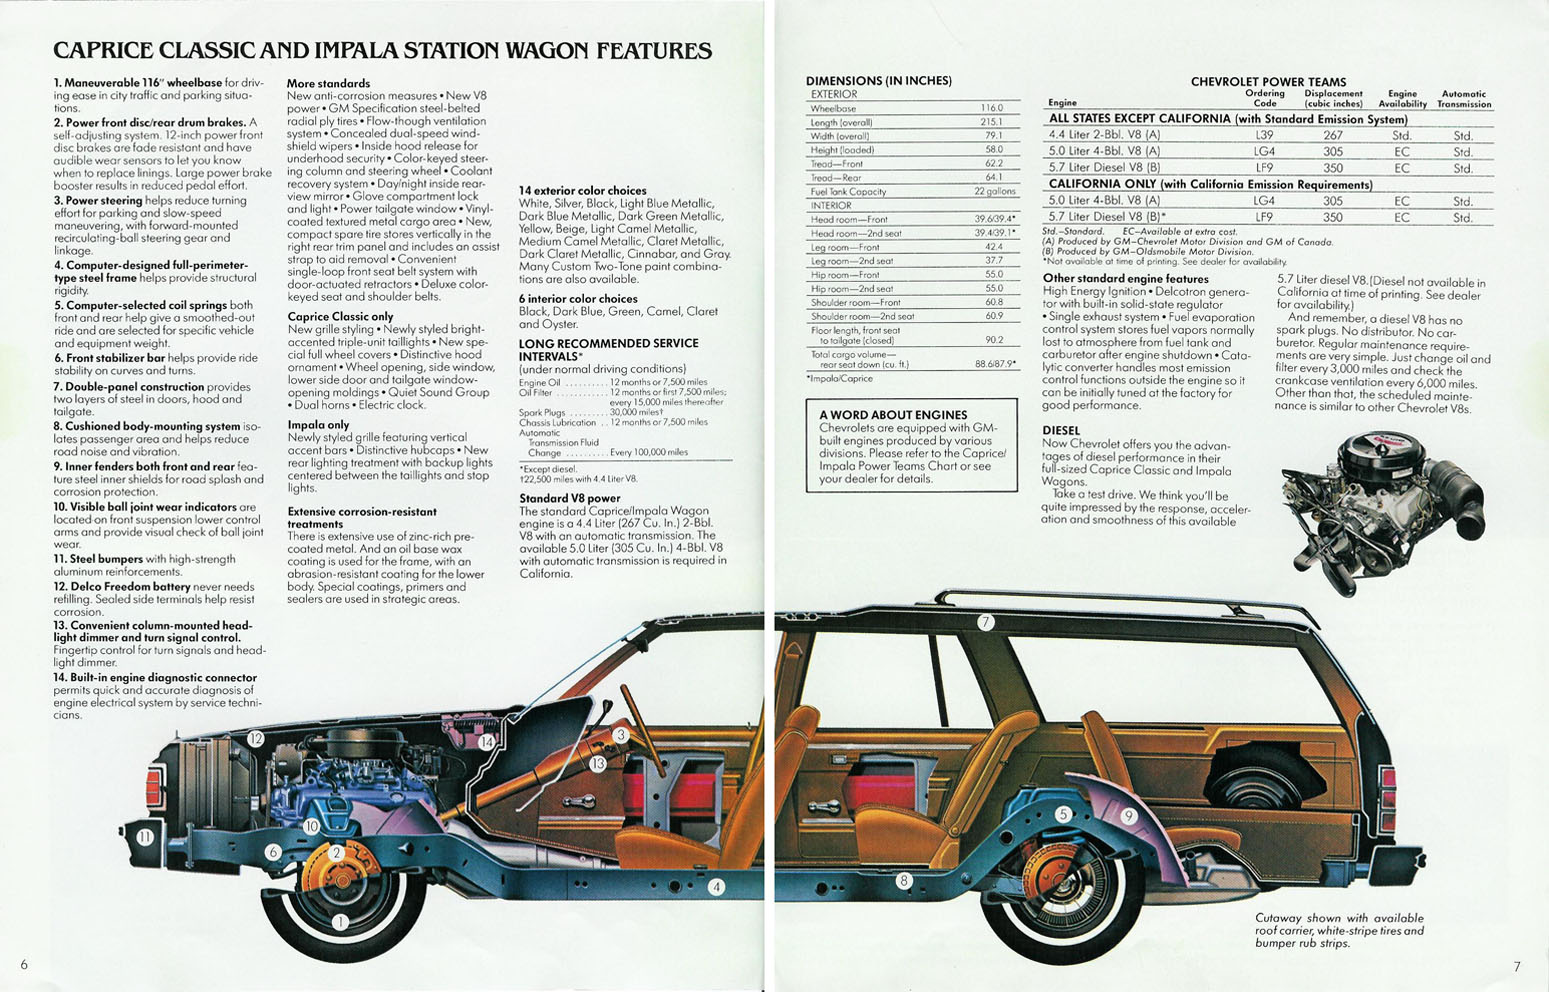 1980 Chevrolet Wagons Brochure Page 2